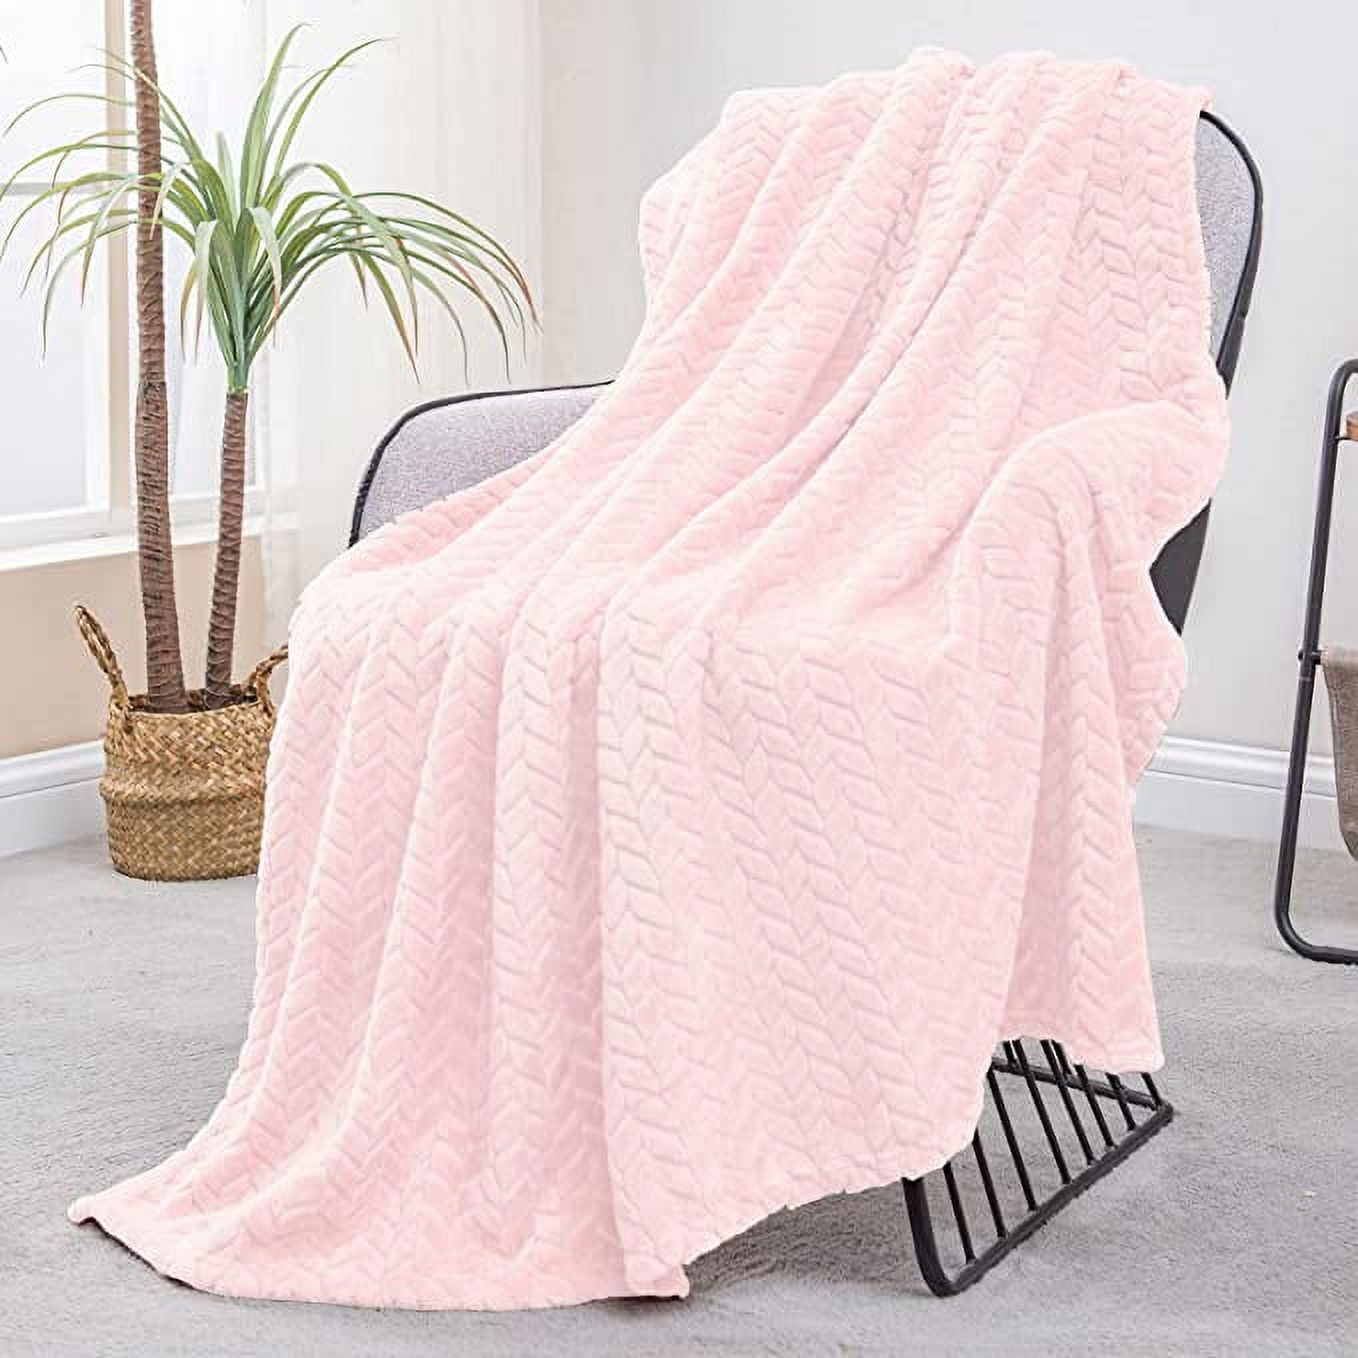 Exclusivo Mezcla Extra Large Flannel Fleece Throw Blanket, 50x70 Inches Leaves Pattern Soft Throw Blanket for Couch, Cozy, Warm, and Lightweight Blanket for Winter, Light Pink Blanket